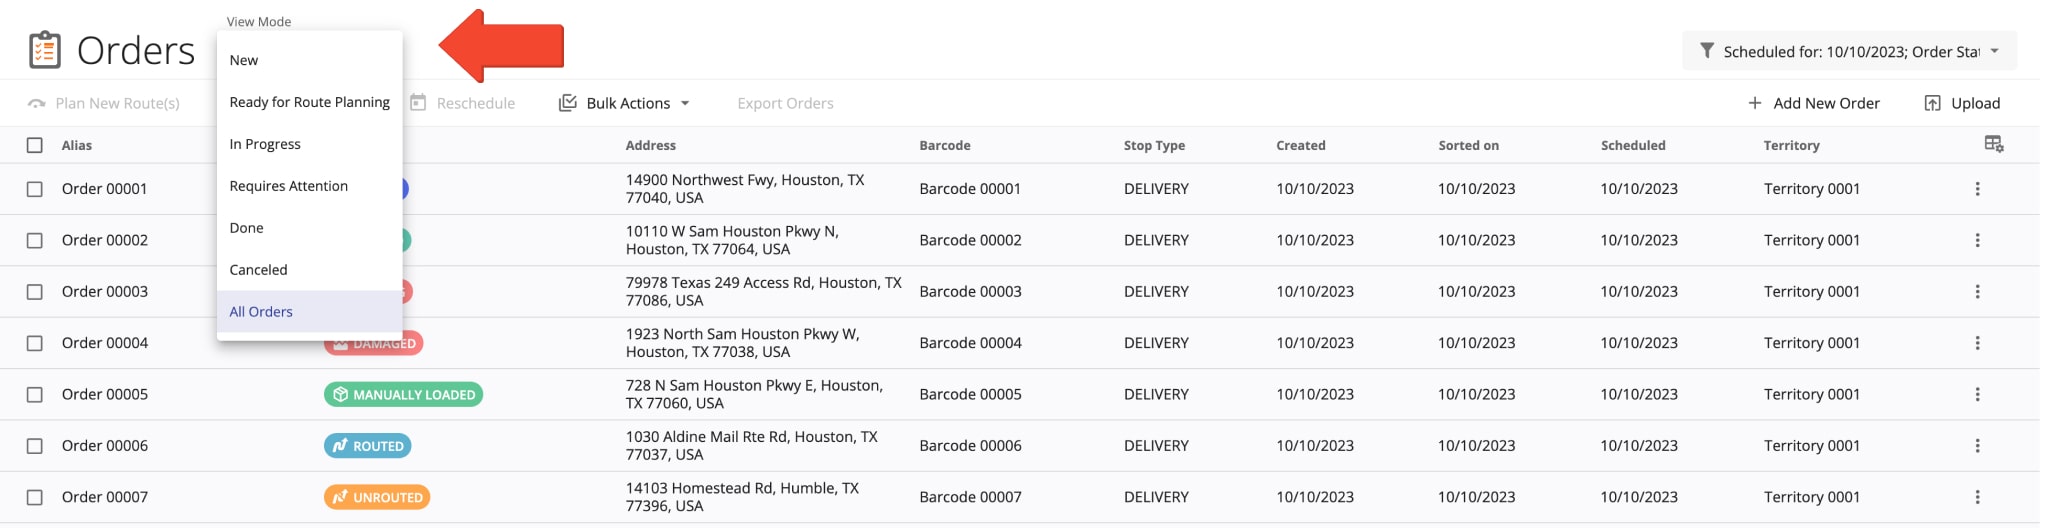 Orders View Mode groups orders by statuses corresponding to their respective stages in Route4Me's Delivery Management Order Lifecycle.